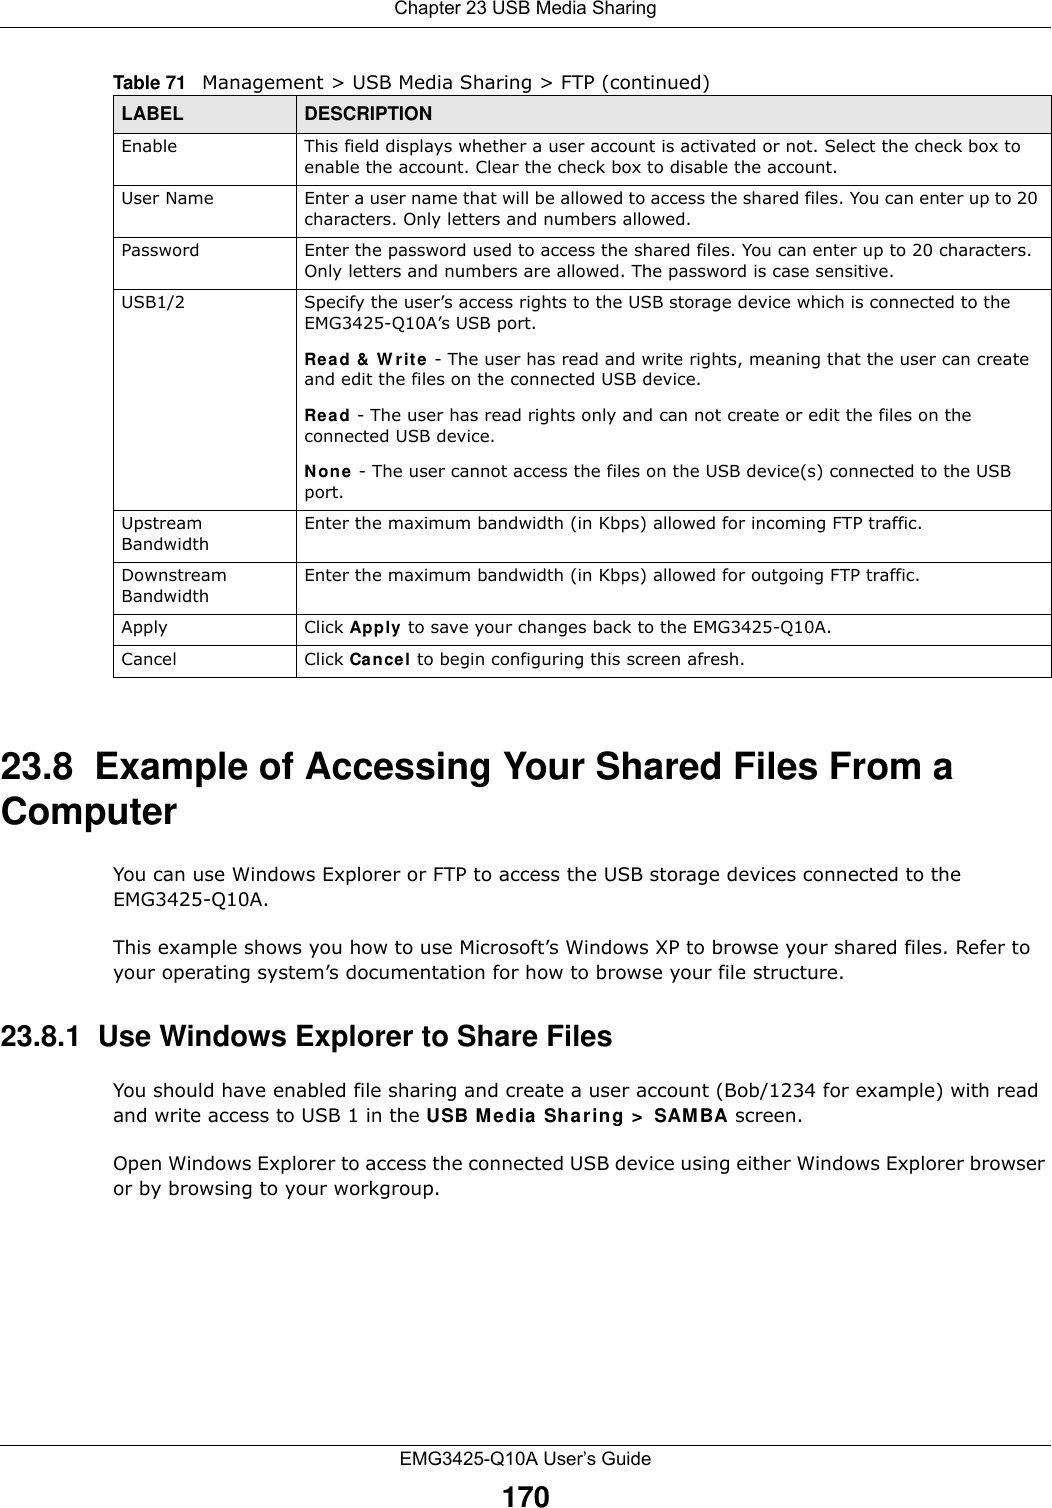 Chapter 23 USB Media SharingEMG3425-Q10A User’s Guide17023.8  Example of Accessing Your Shared Files From a Computer You can use Windows Explorer or FTP to access the USB storage devices connected to the EMG3425-Q10A.This example shows you how to use Microsoft’s Windows XP to browse your shared files. Refer to your operating system’s documentation for how to browse your file structure. 23.8.1  Use Windows Explorer to Share Files You should have enabled file sharing and create a user account (Bob/1234 for example) with read and write access to USB 1 in the USB M edia Sha r ing &gt;  SAM BA screen.Open Windows Explorer to access the connected USB device using either Windows Explorer browser or by browsing to your workgroup.Enable This field displays whether a user account is activated or not. Select the check box to enable the account. Clear the check box to disable the account.User Name Enter a user name that will be allowed to access the shared files. You can enter up to 20 characters. Only letters and numbers allowed.Password Enter the password used to access the shared files. You can enter up to 20 characters. Only letters and numbers are allowed. The password is case sensitive.USB1/2 Specify the user’s access rights to the USB storage device which is connected to the EMG3425-Q10A’s USB port.Read &amp;  W rit e - The user has read and write rights, meaning that the user can create and edit the files on the connected USB device.Read - The user has read rights only and can not create or edit the files on the connected USB device.N on e  - The user cannot access the files on the USB device(s) connected to the USB port.Upstream BandwidthEnter the maximum bandwidth (in Kbps) allowed for incoming FTP traffic.Downstream BandwidthEnter the maximum bandwidth (in Kbps) allowed for outgoing FTP traffic.Apply Click Apply  to save your changes back to the EMG3425-Q10A.Cancel Click Cancel to begin configuring this screen afresh.Table 71   Management &gt; USB Media Sharing &gt; FTP (continued)LABEL DESCRIPTION